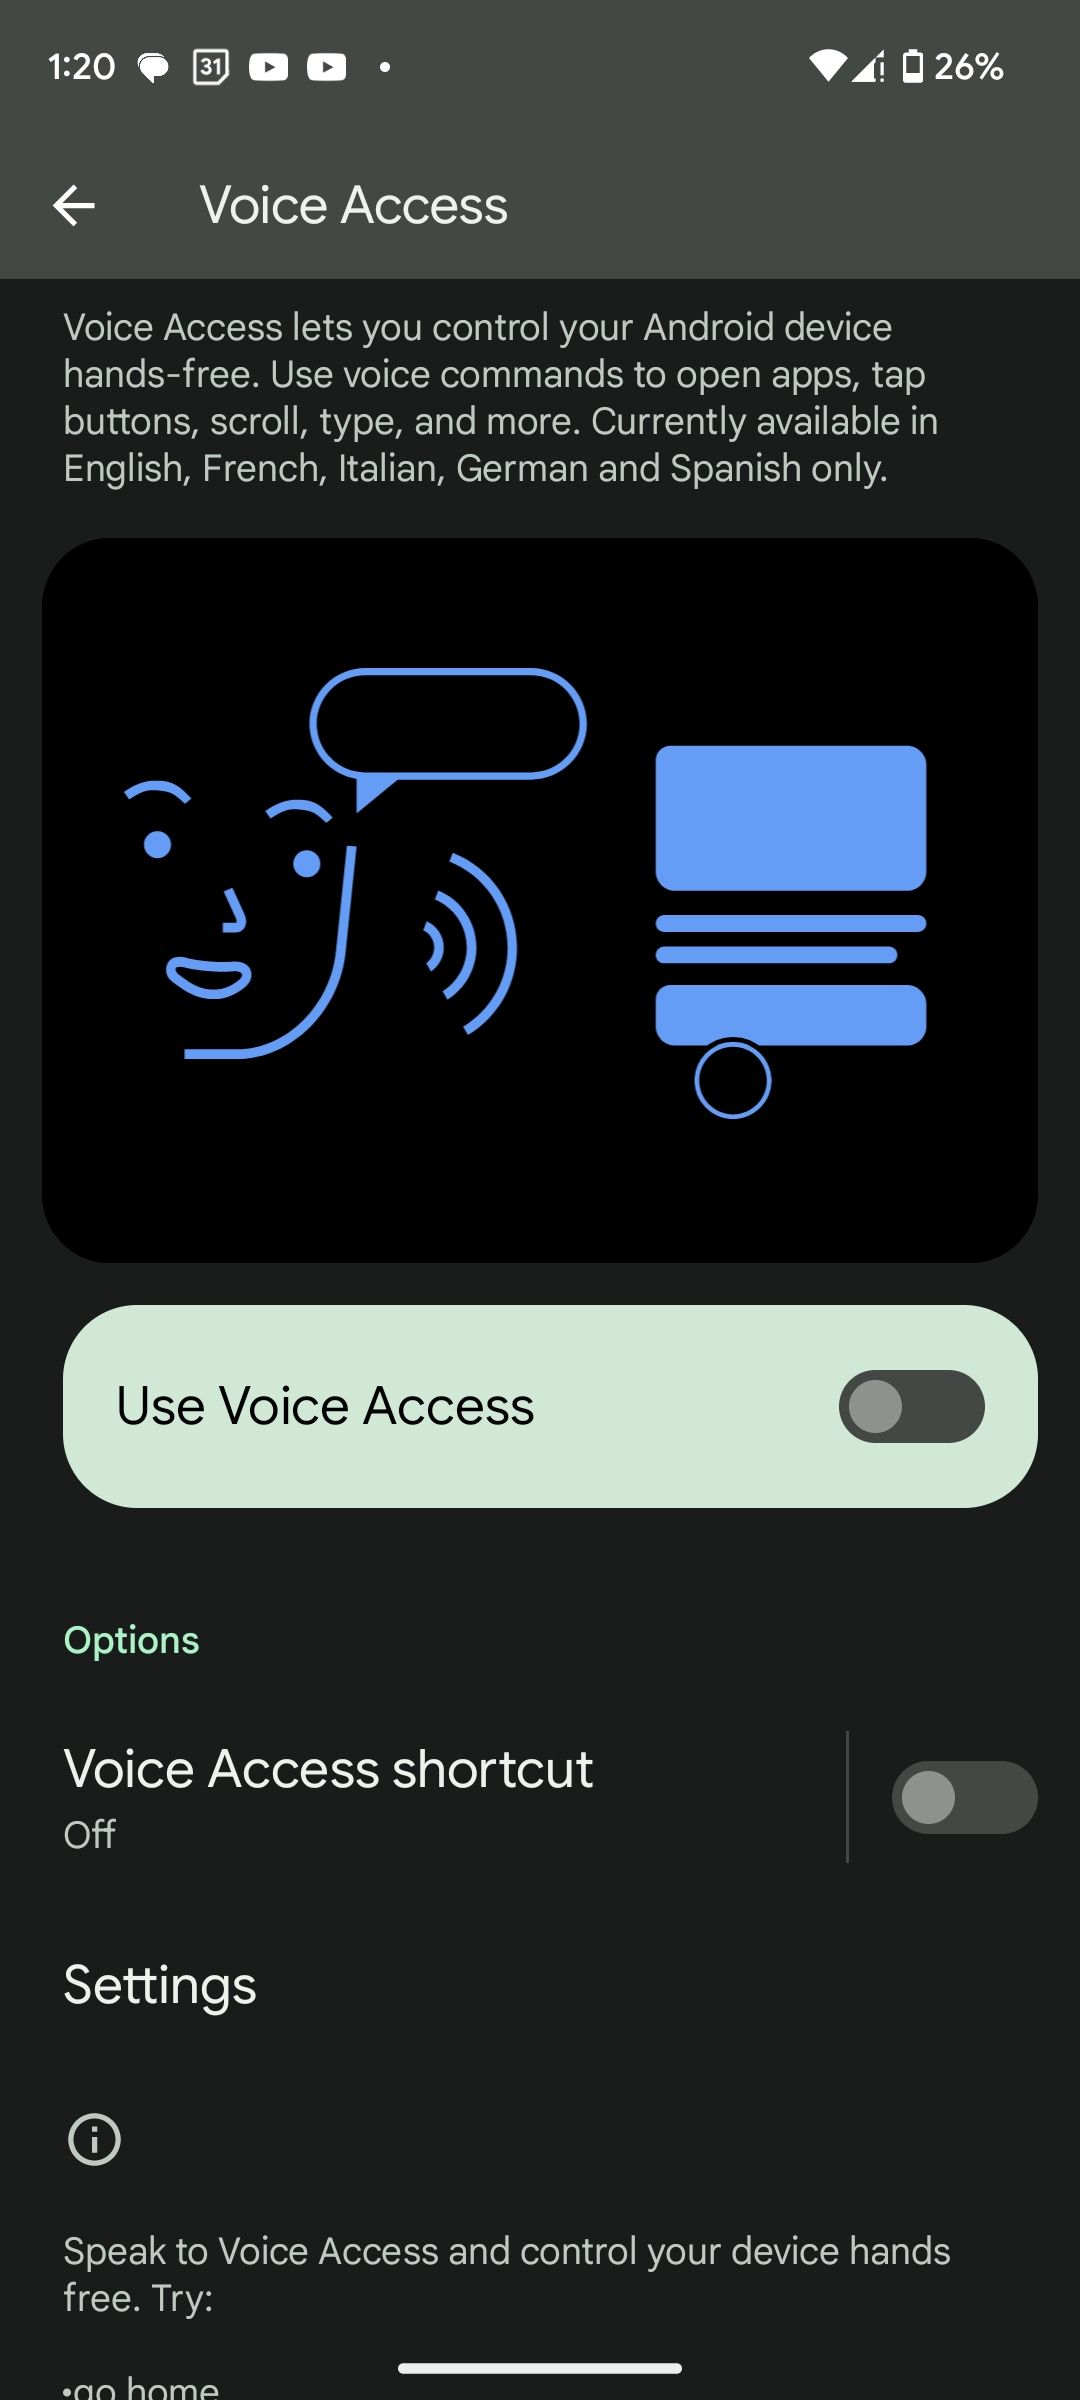 Voice Access settings page